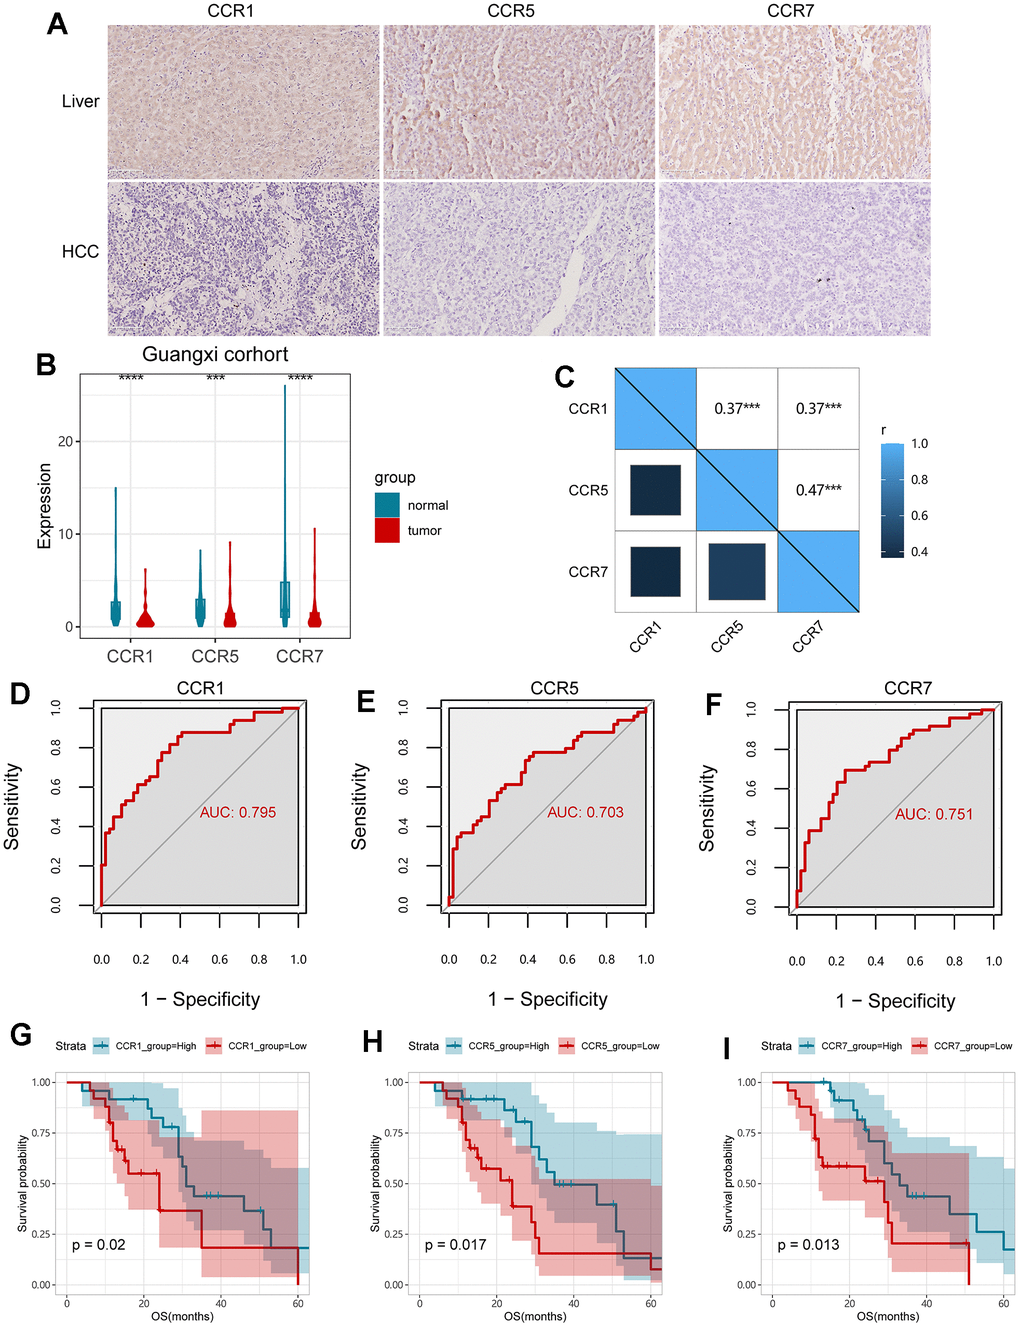 Validation of CCR1, CCR5 and CCR7 in Guangxi cohort. (A) Expression of CCR1, CCR5 and CCR7 in HCC and para-carcinoma live tissues detected with IHC assay; (B) expression of CCR1, CCR5 and CCR7 in HCC and para-carcinoma live tissues detected with qPCR assay; (C) Matrix graphs of Pearson correlations for CCR1, CCR5 and CCR7; (D–F) ROC curves for CCR1, CCR5 and CCR7; (G–I) survival analysis for OS in terms of CCR1, CCR5 and CCR7; ** P